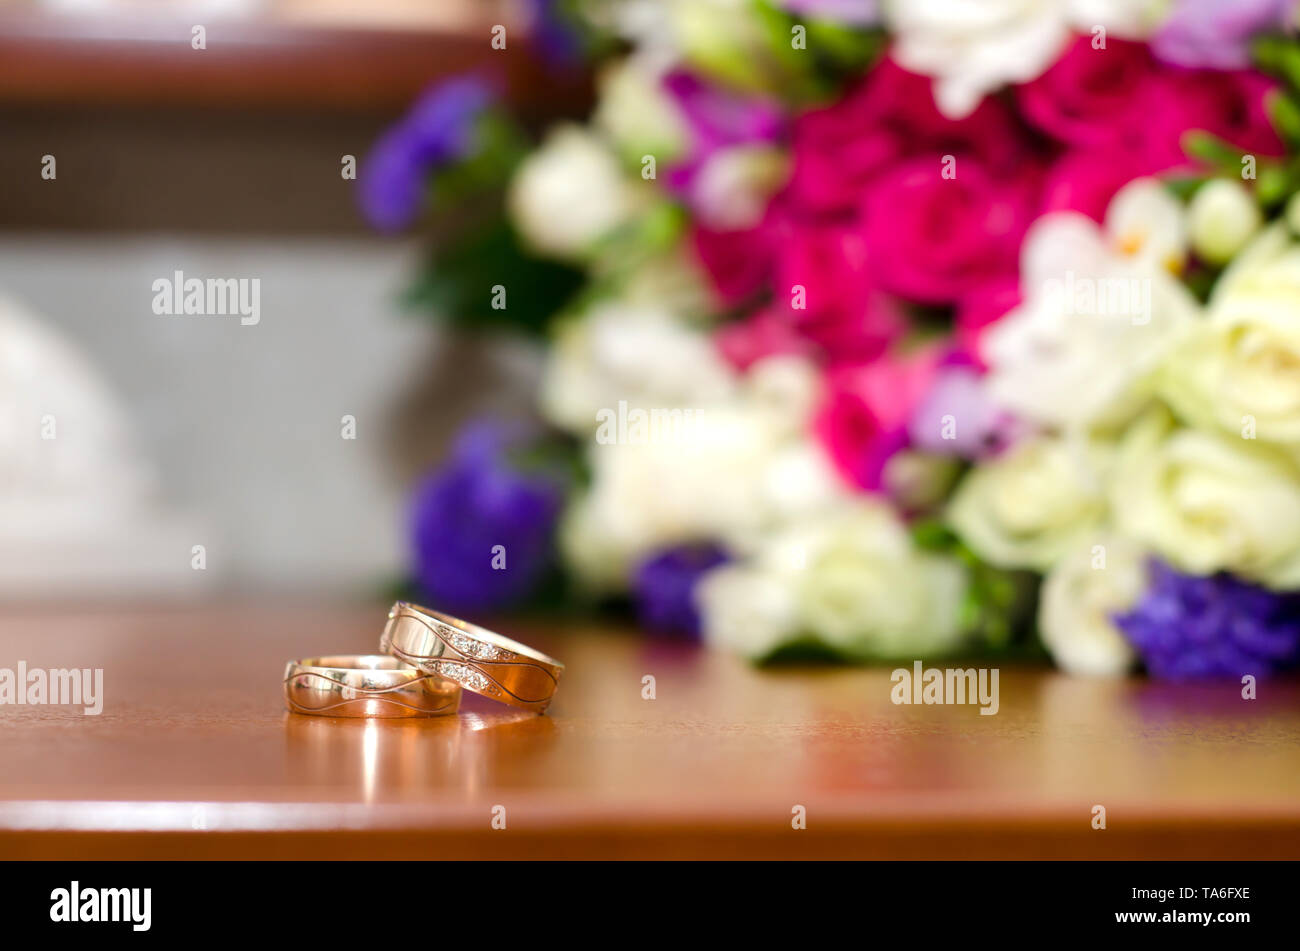 Bright picture with wedding rings and colorful wedding bouquet on the table Stock Photo